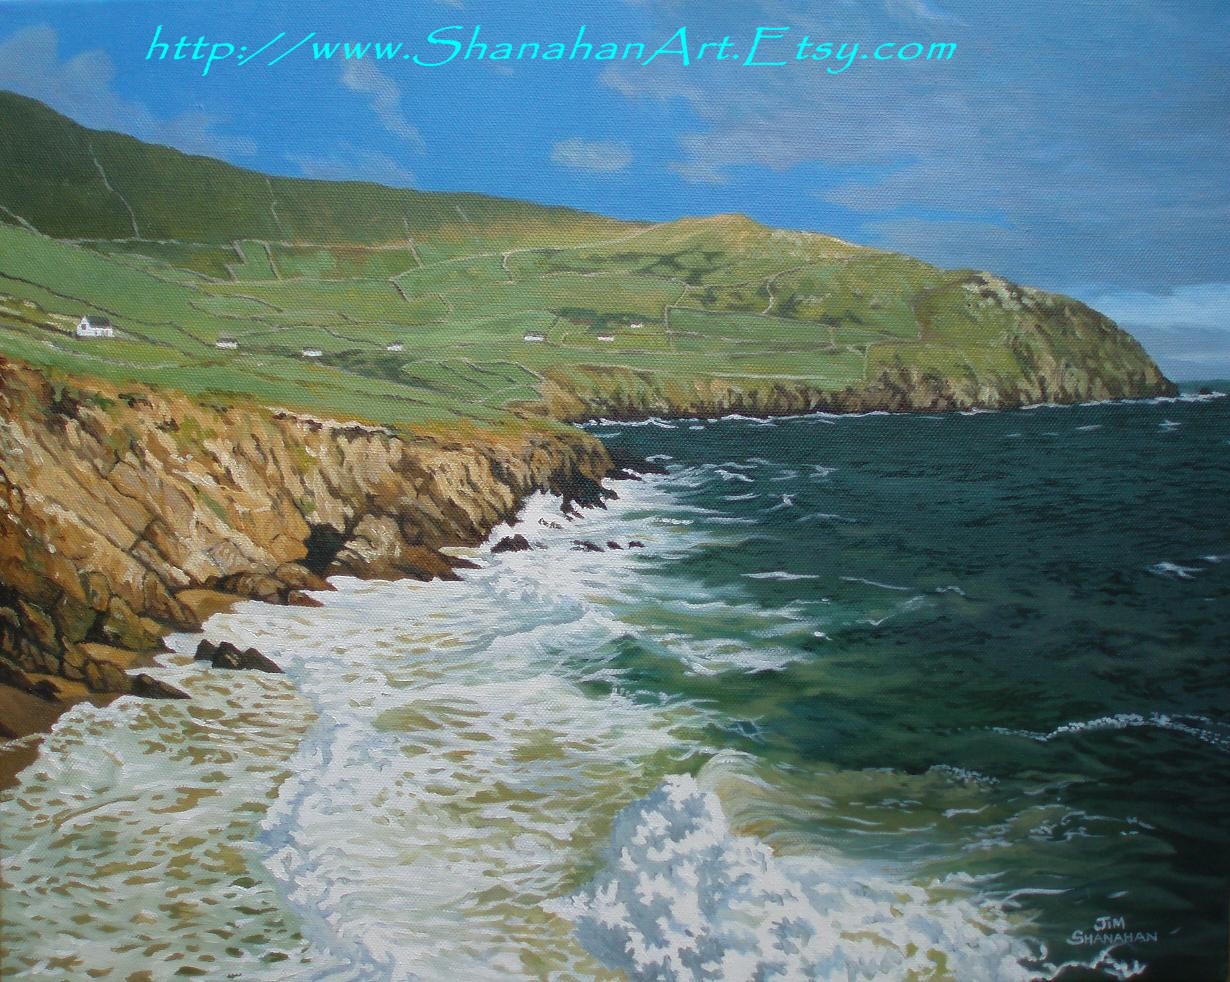 Slea Head -- Sold in Auction